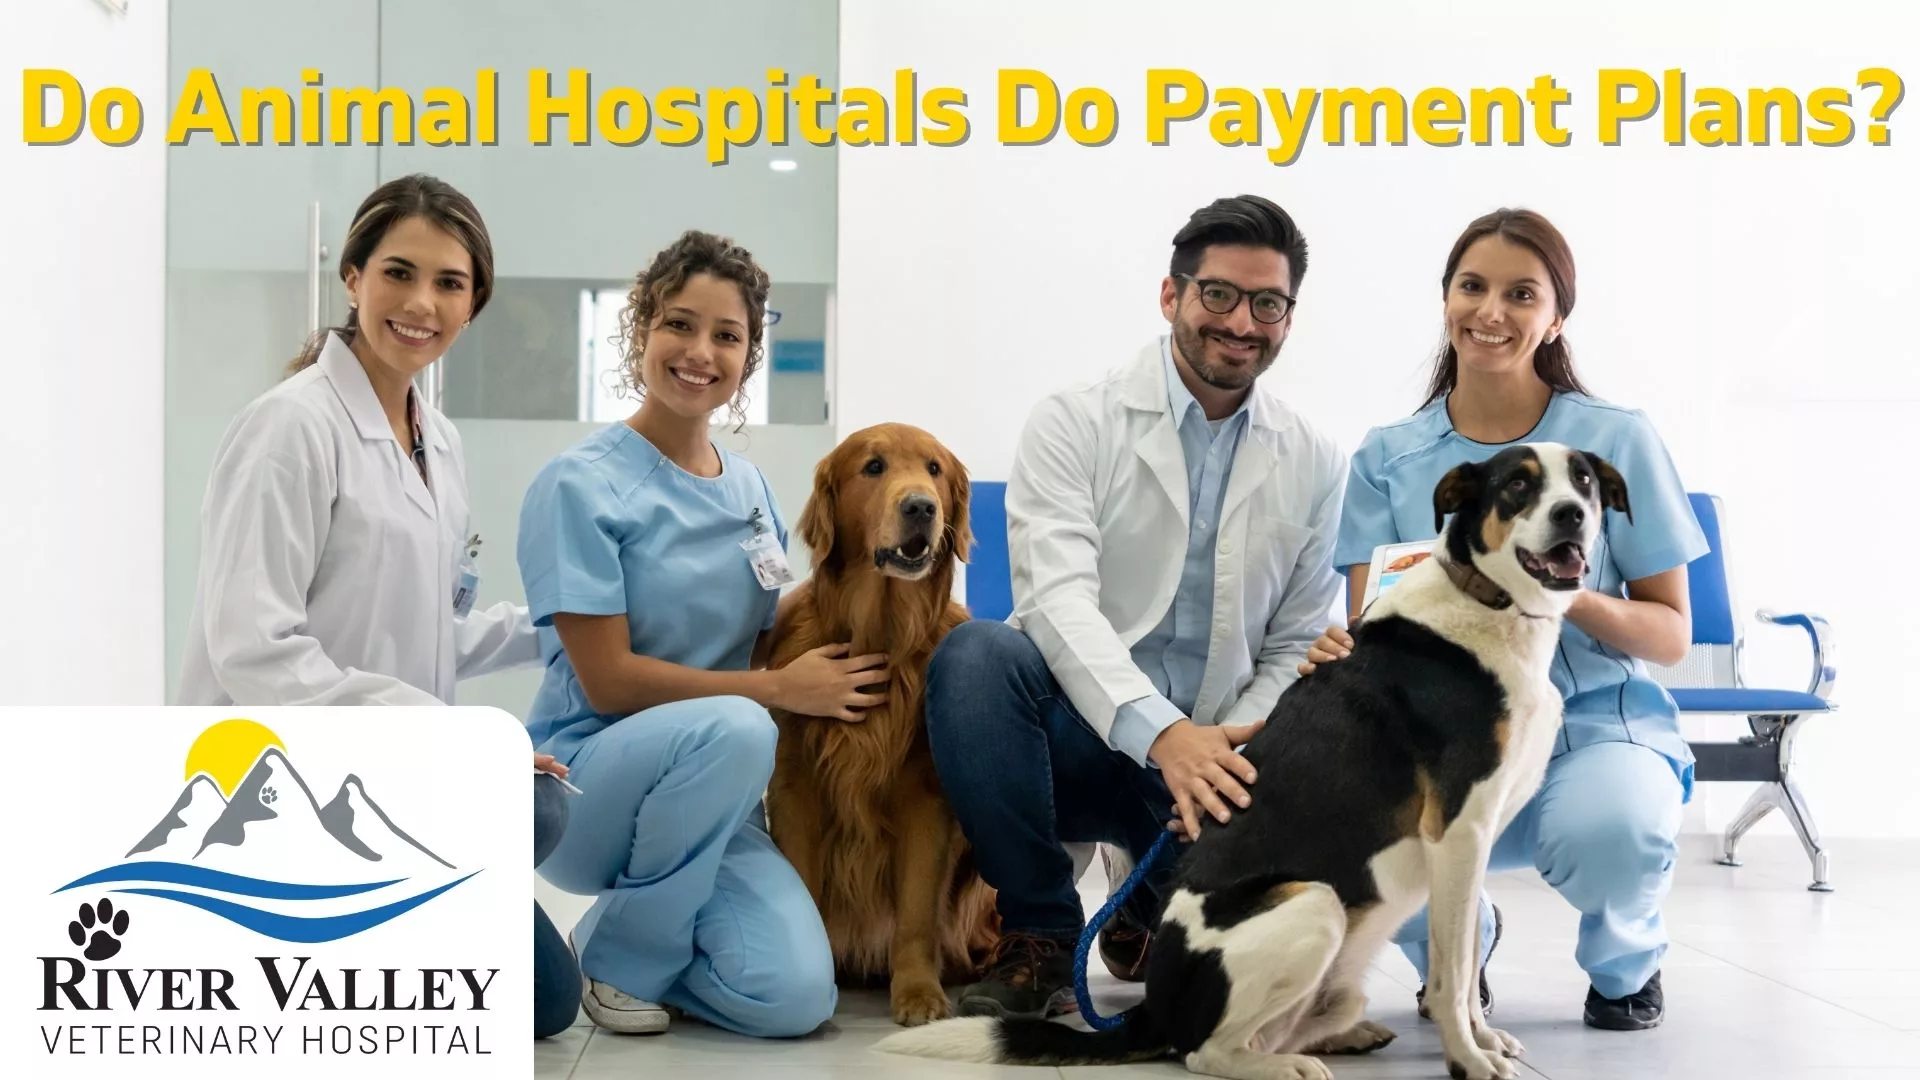 Do Animal Hospitals Do Payment Plans - By River Valley Veterinary Hospital